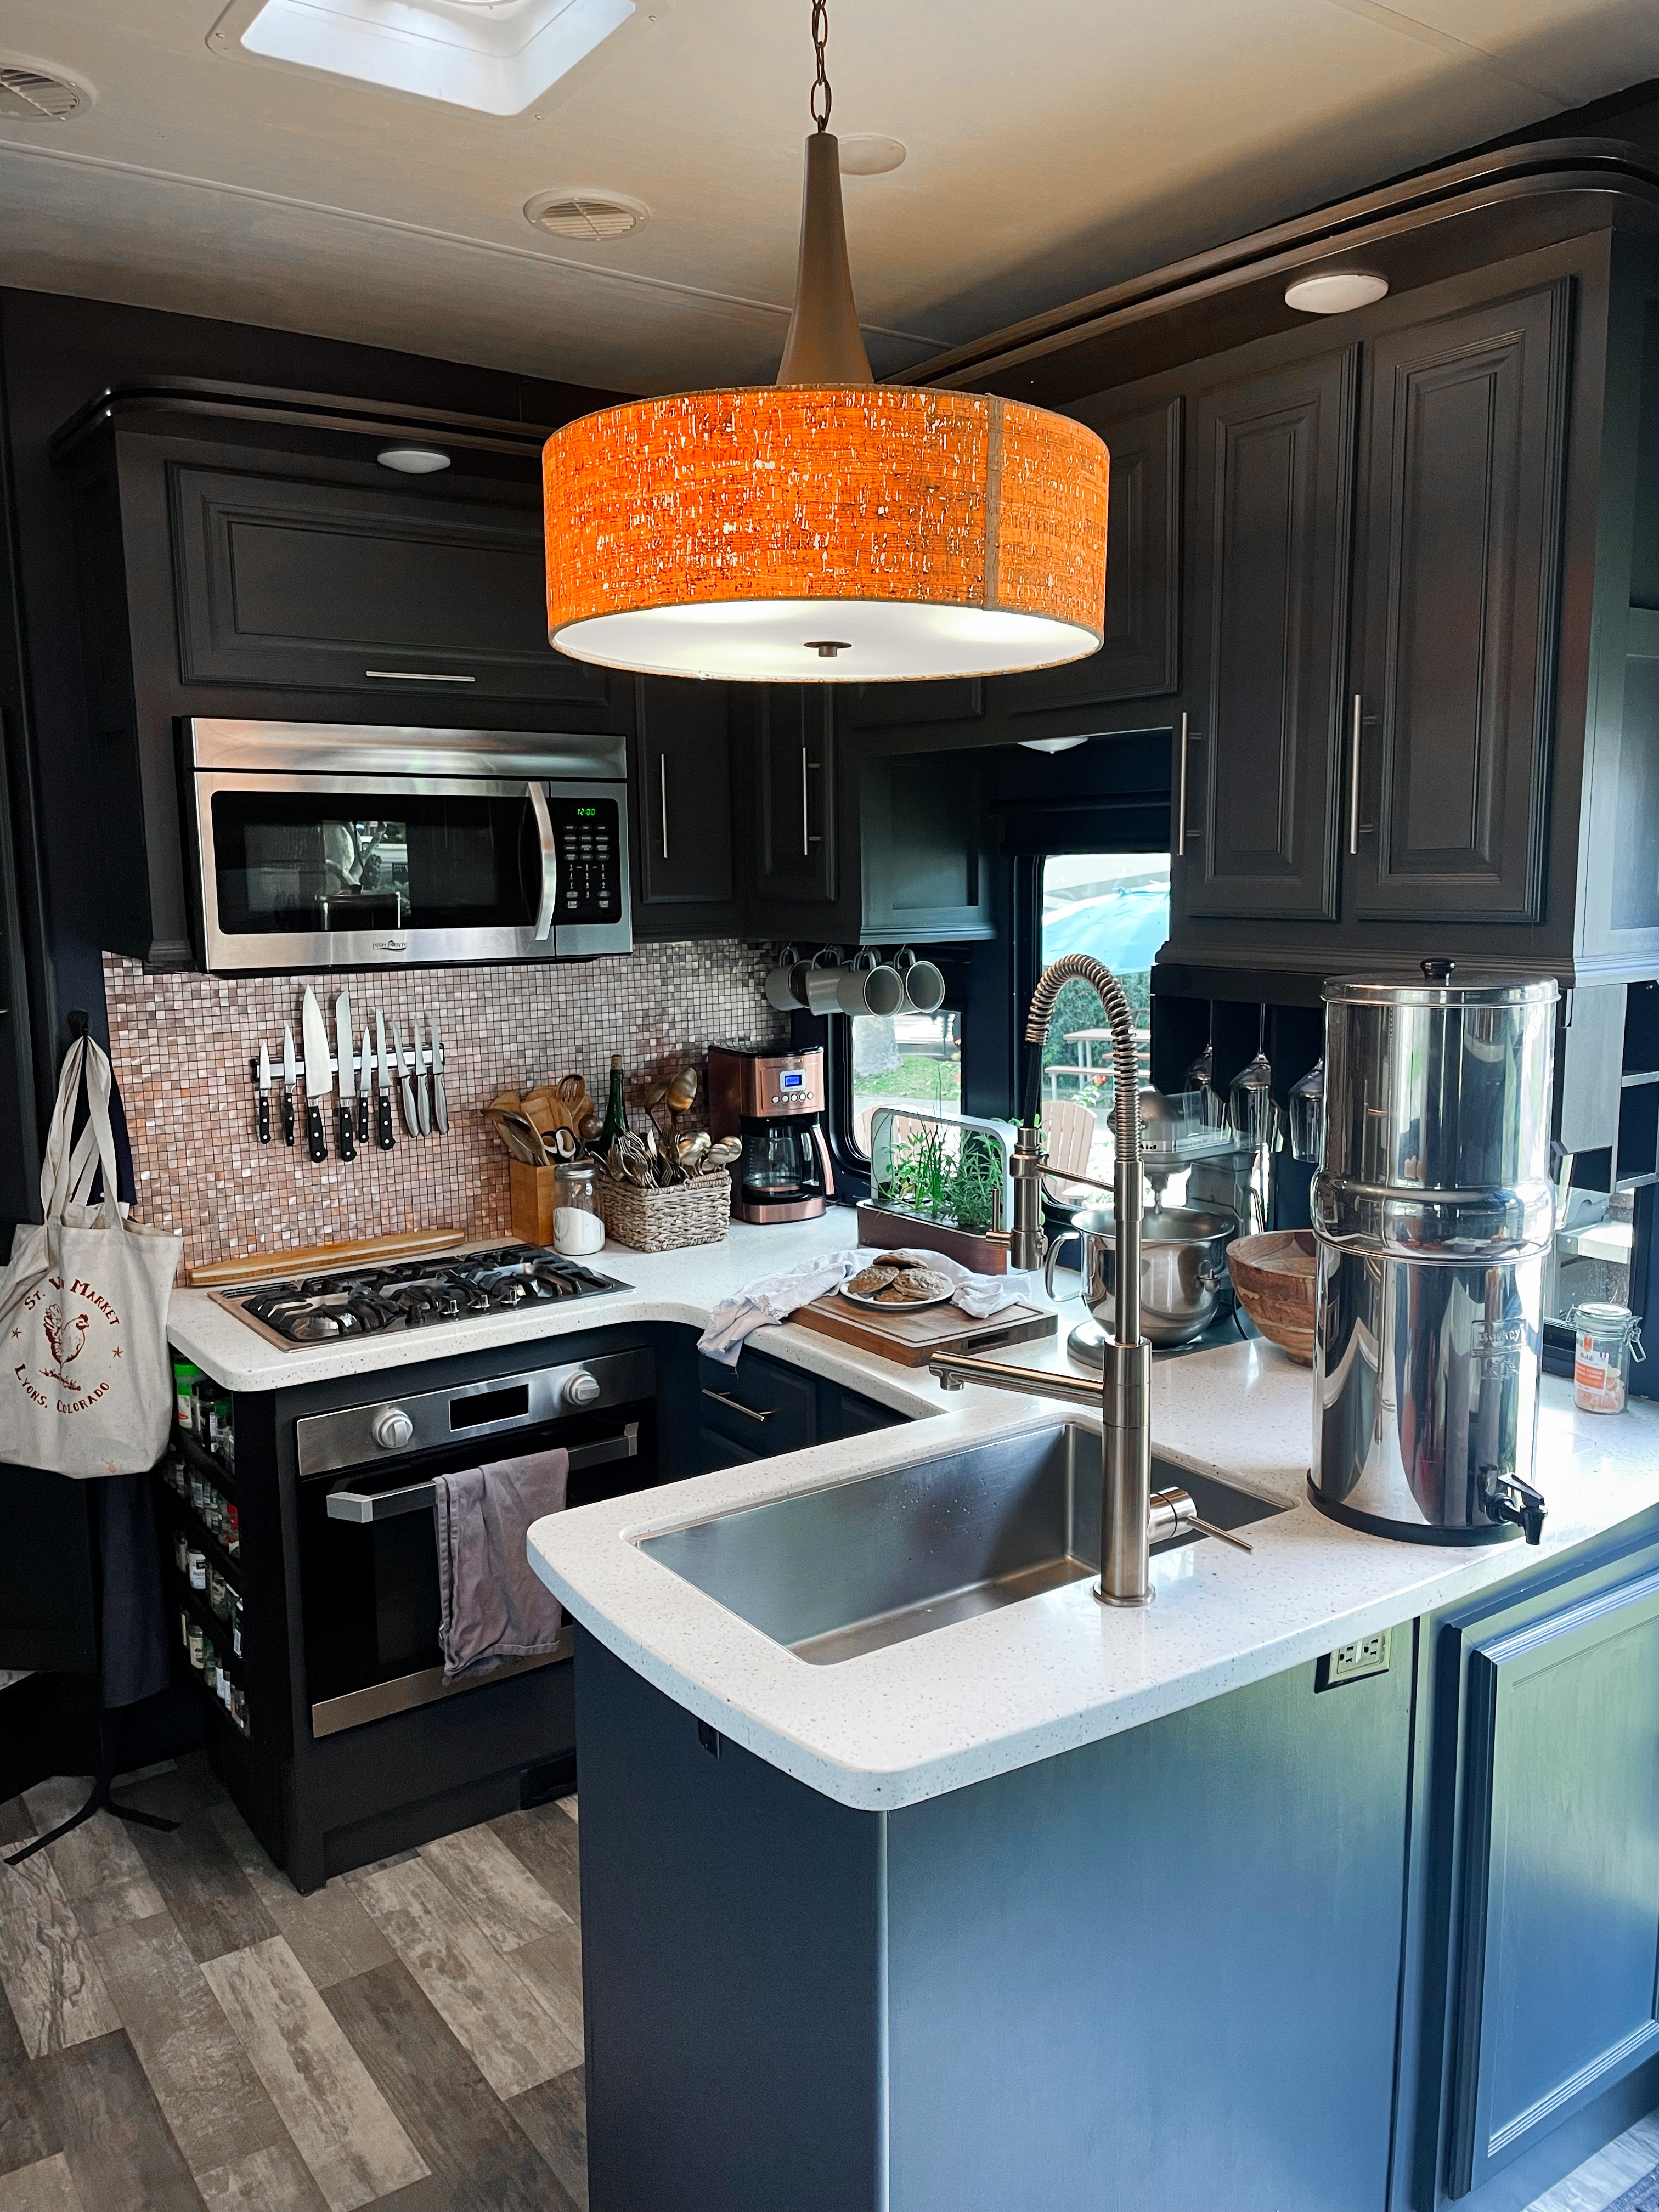 The renovated kitchen inside our 5th wheel RV.